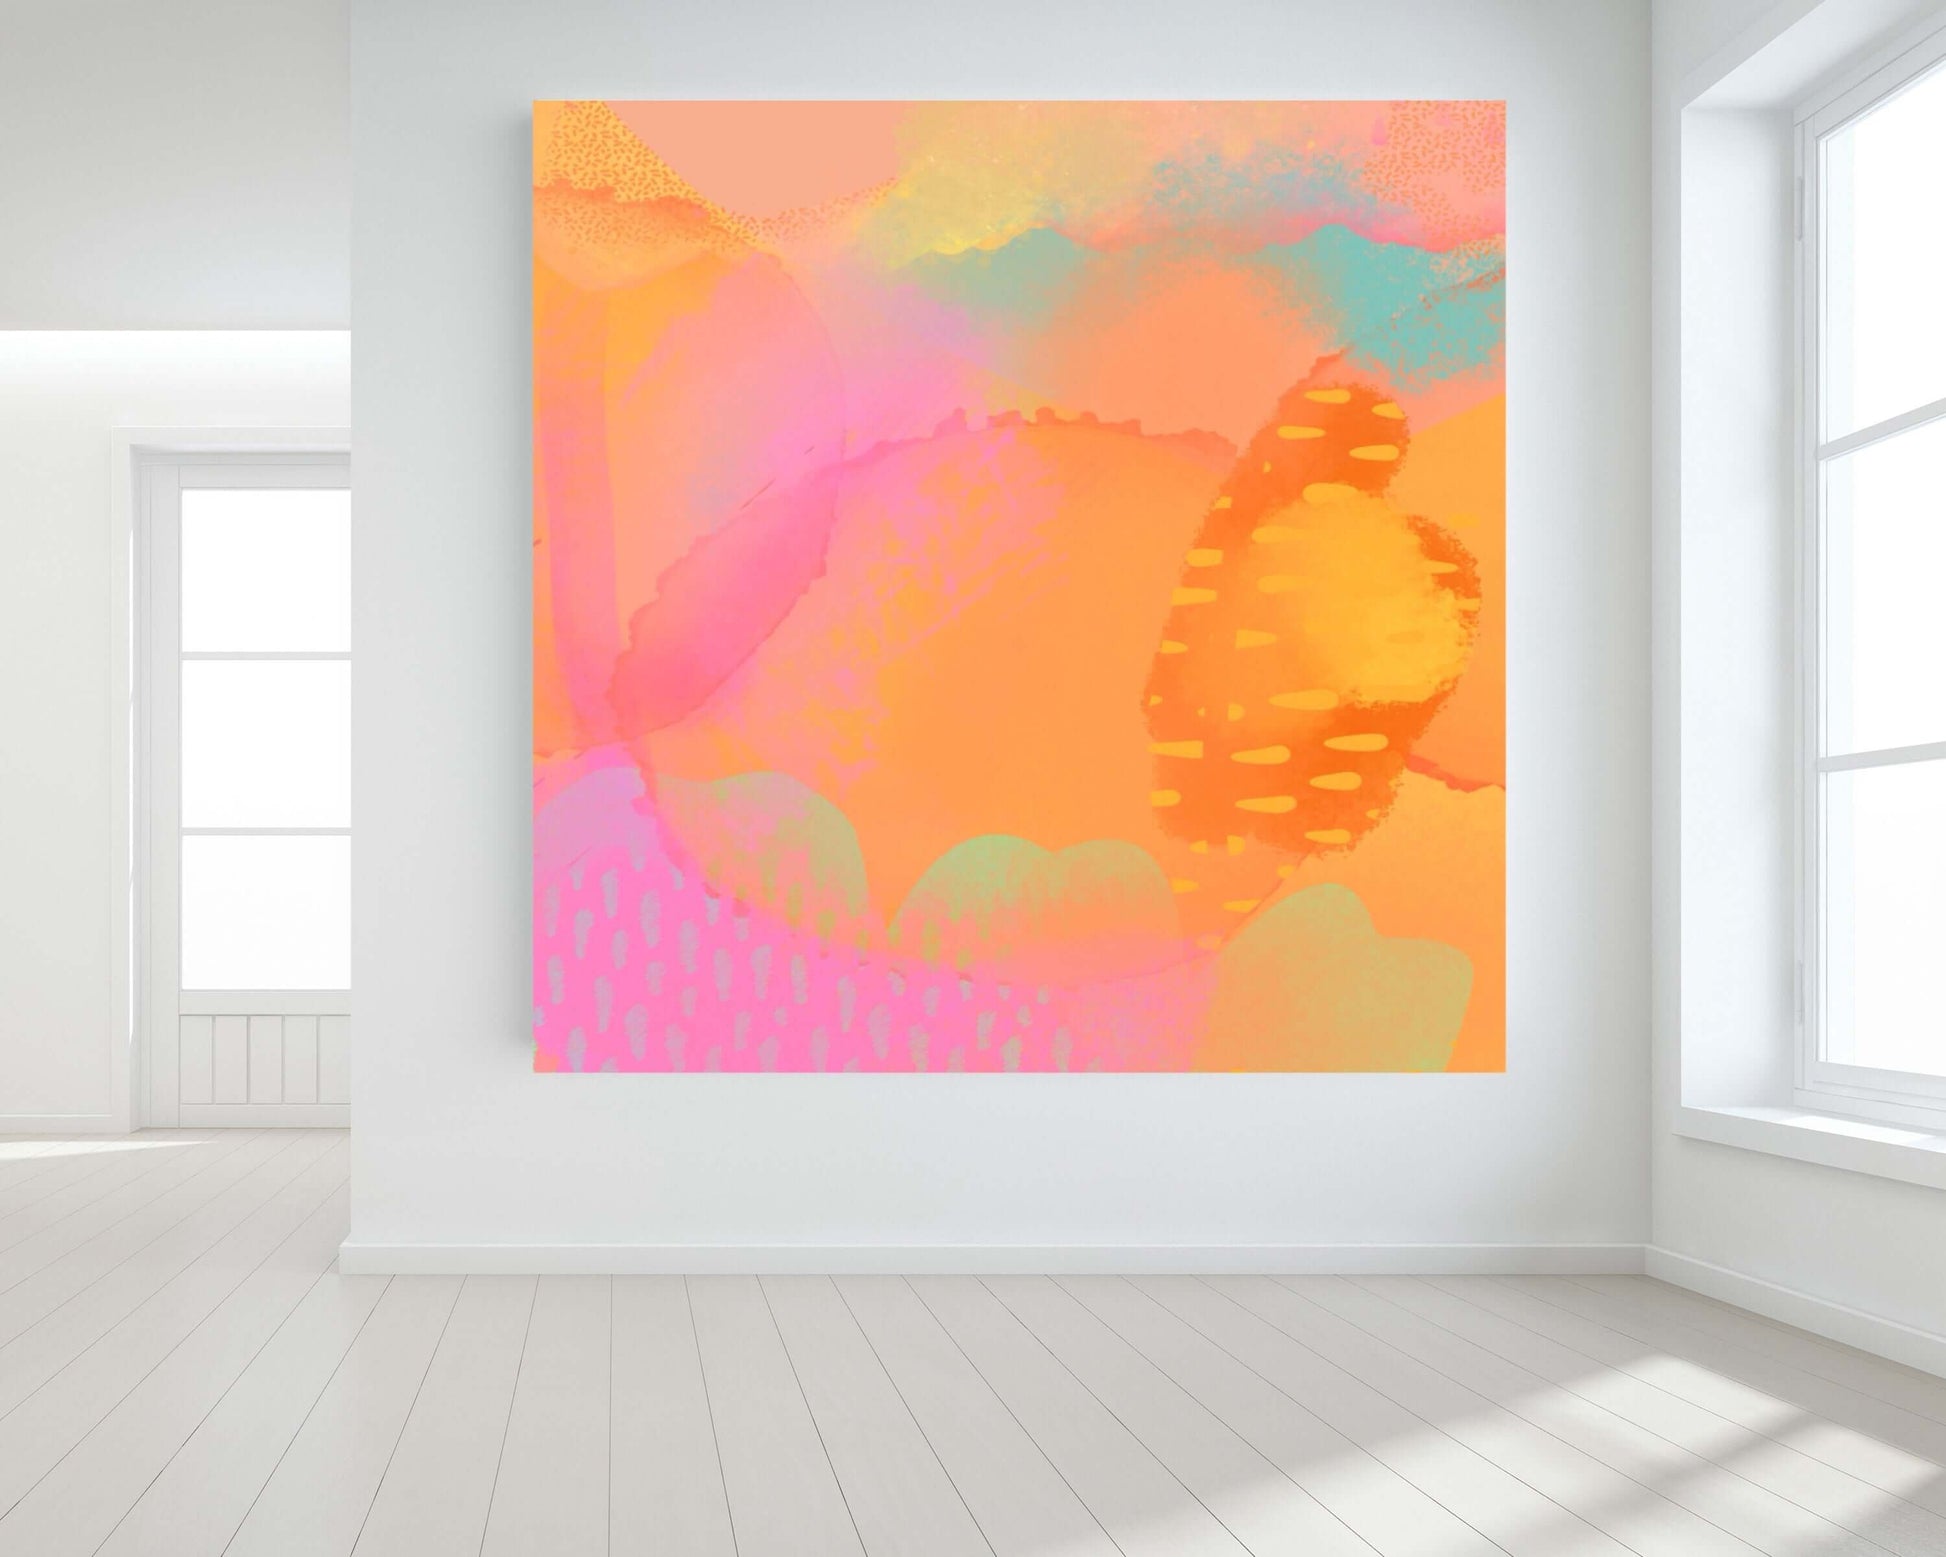 Bright Pastel Desert Hues of Orange, Yellow and Pink “Desert Delight” Abstract Art Canvas Print Wall Art Large Canvas on Wall